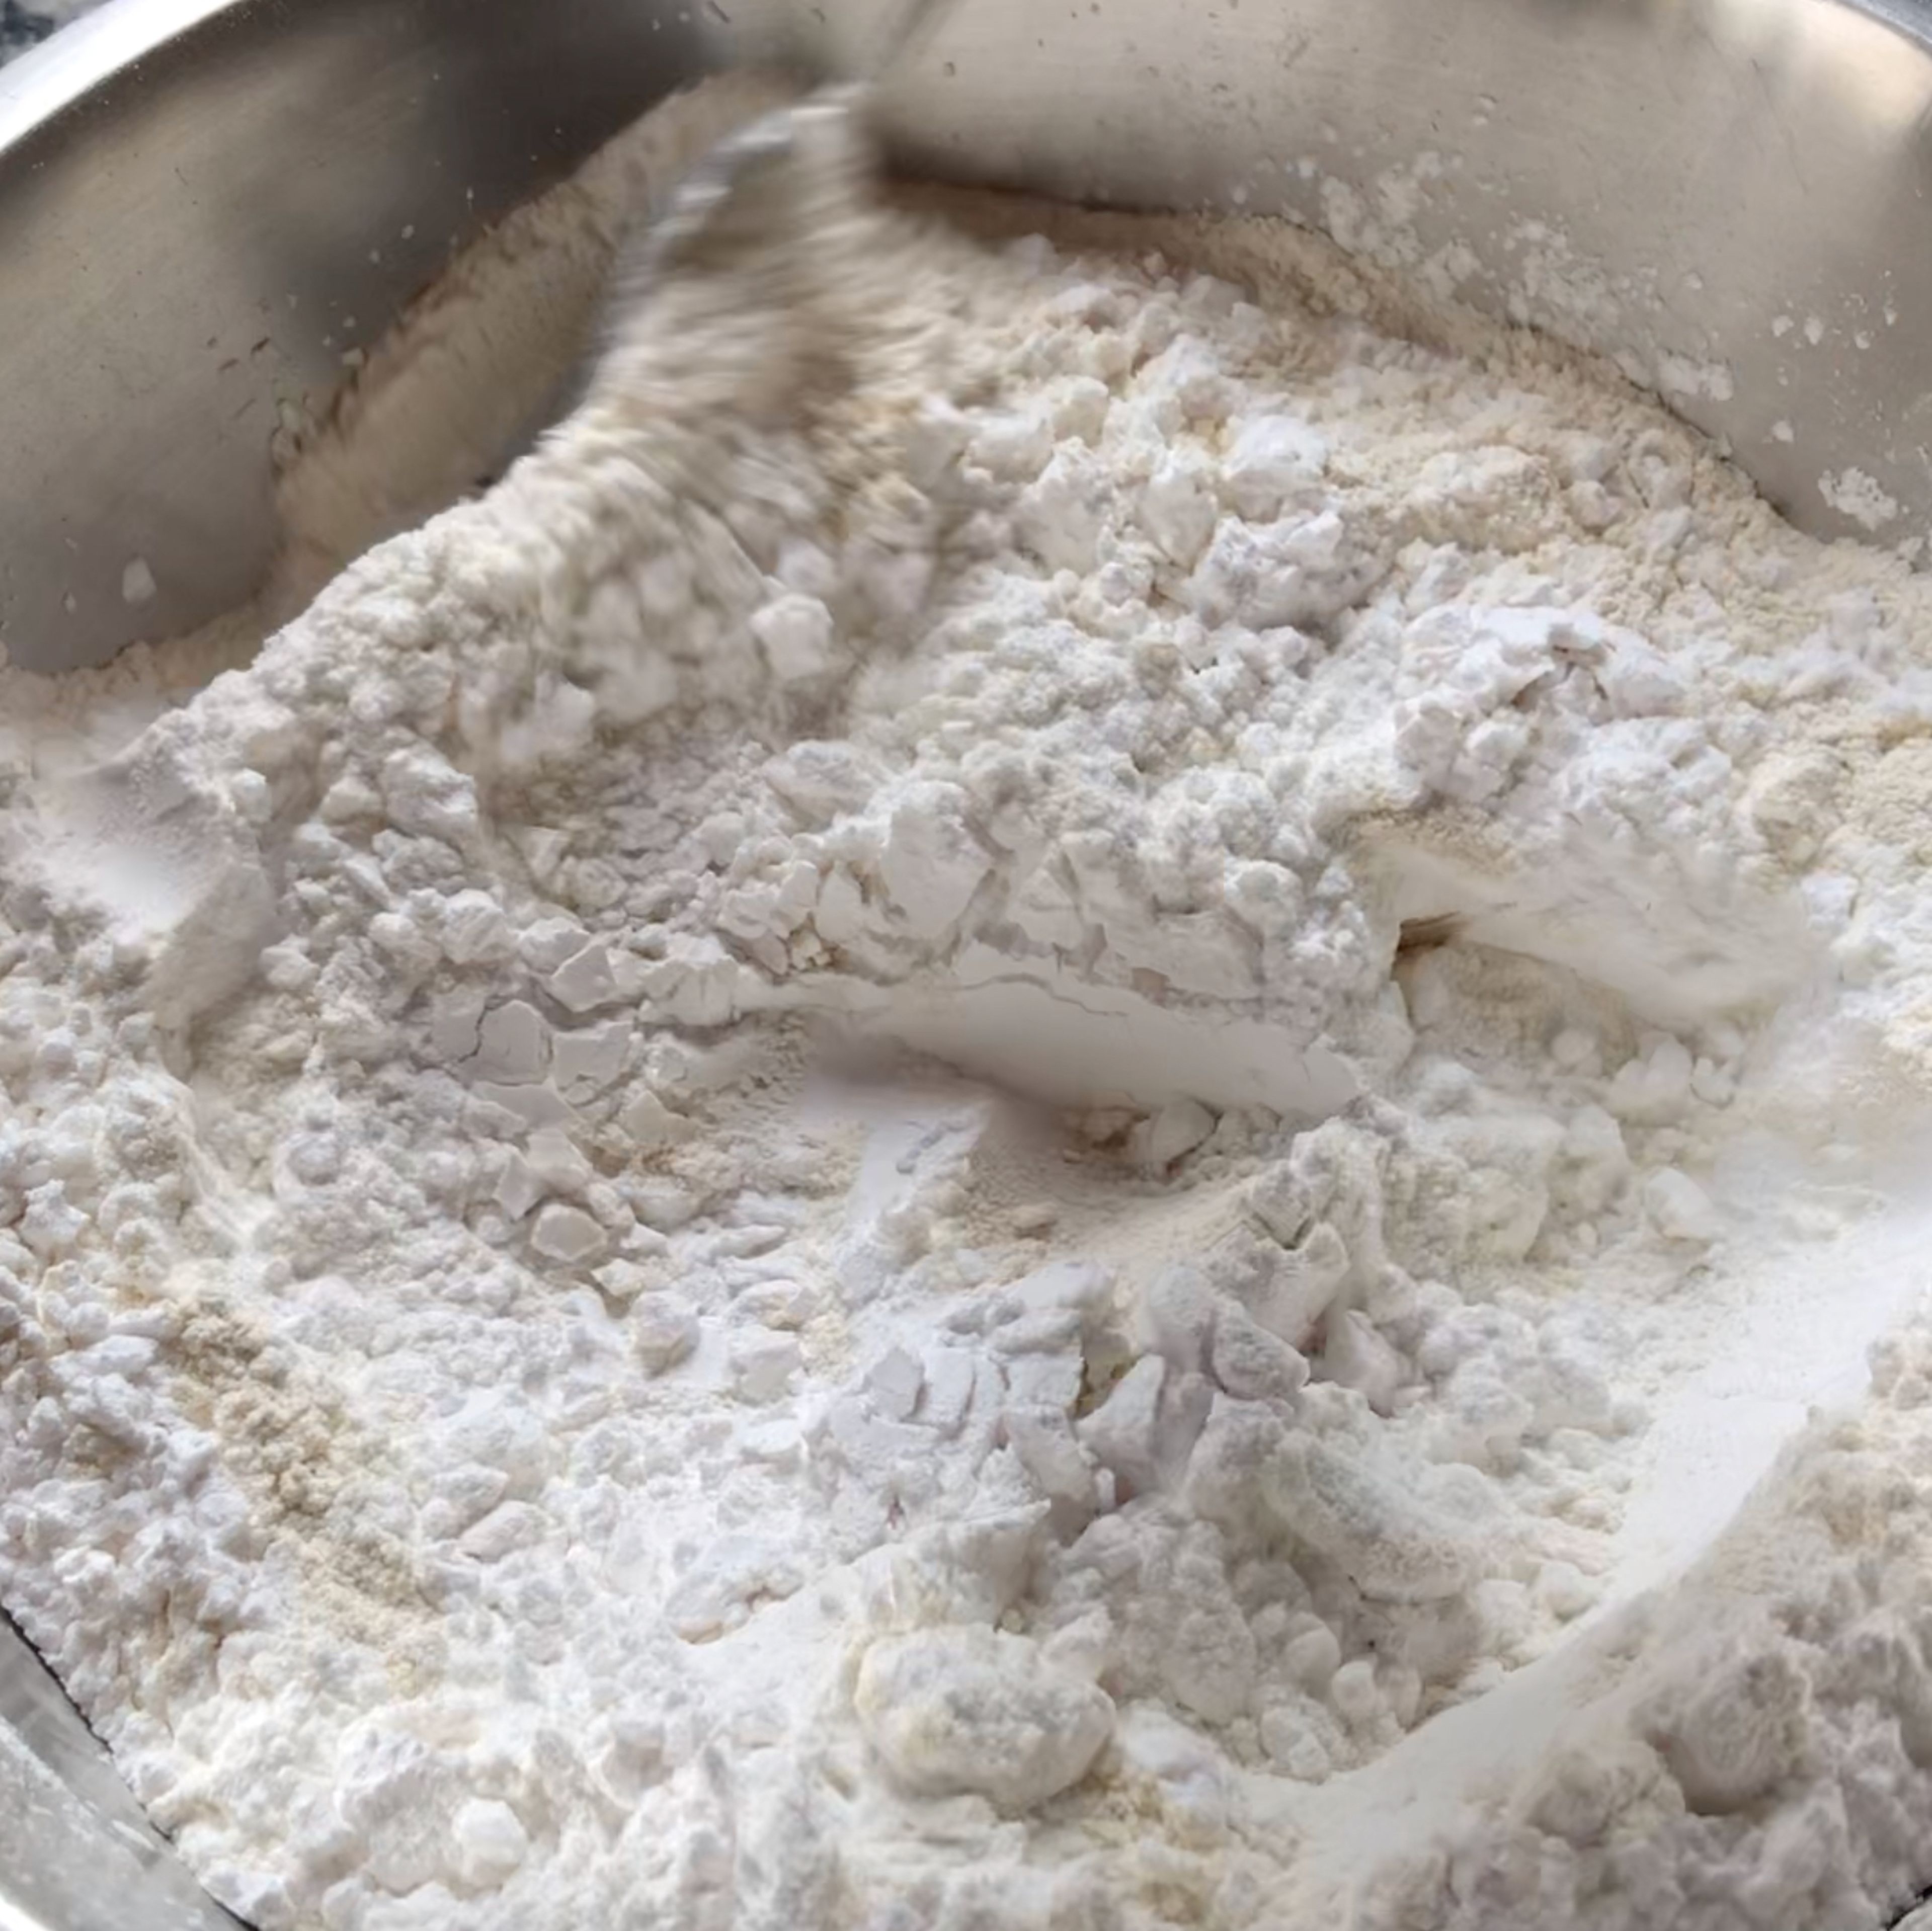 Now mix all the dry ingredients in bowl. The brown rice flour, cornstarch, tapioca flour, baking powder and the xantham gum. It’s important to mix them well.